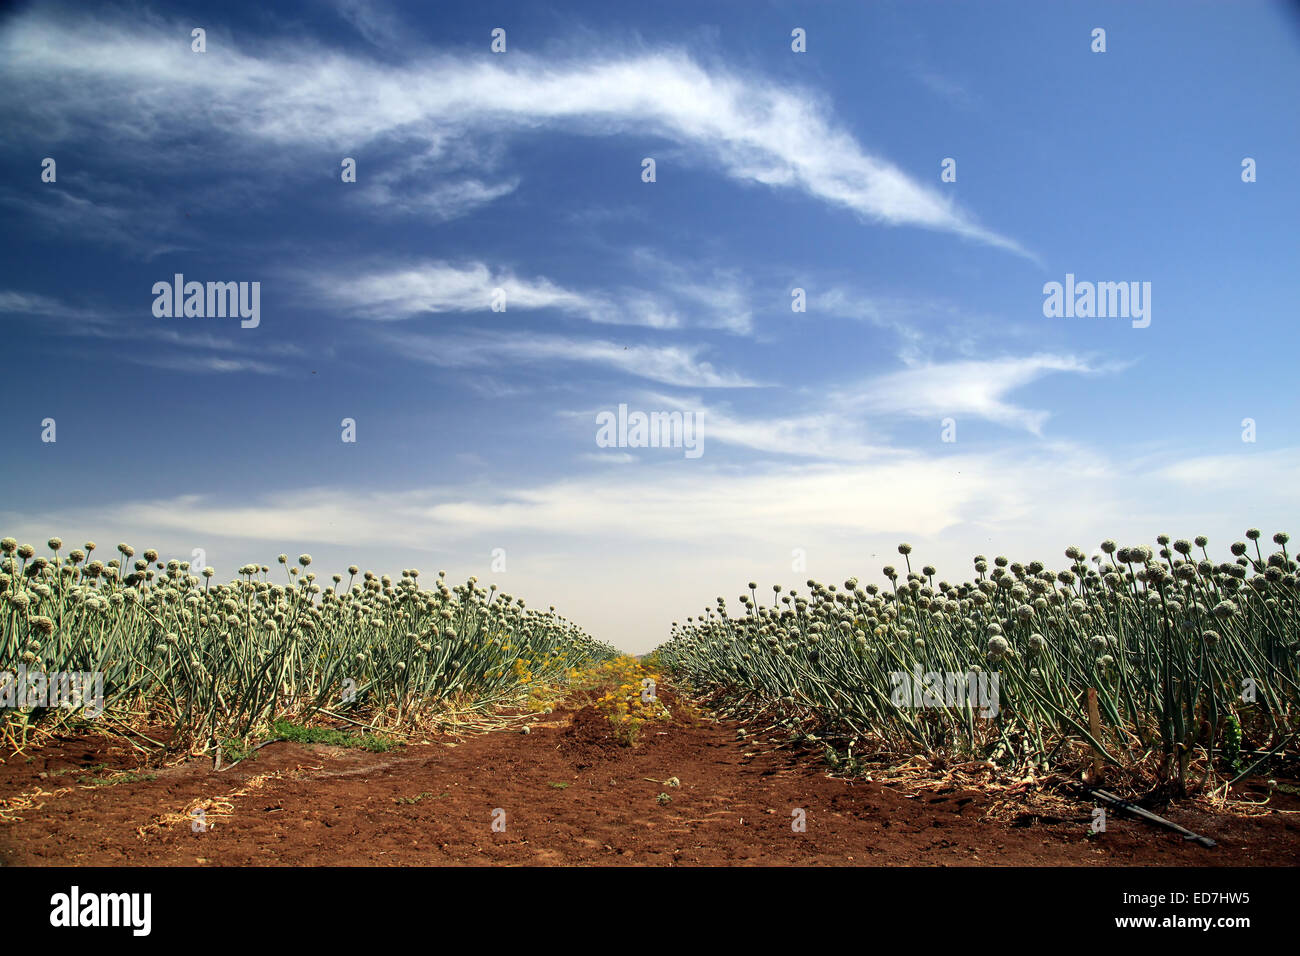 An agricultural field of onions. The onion plants are blossoming with distinct round flowers. A path goes through the field. Stock Photo